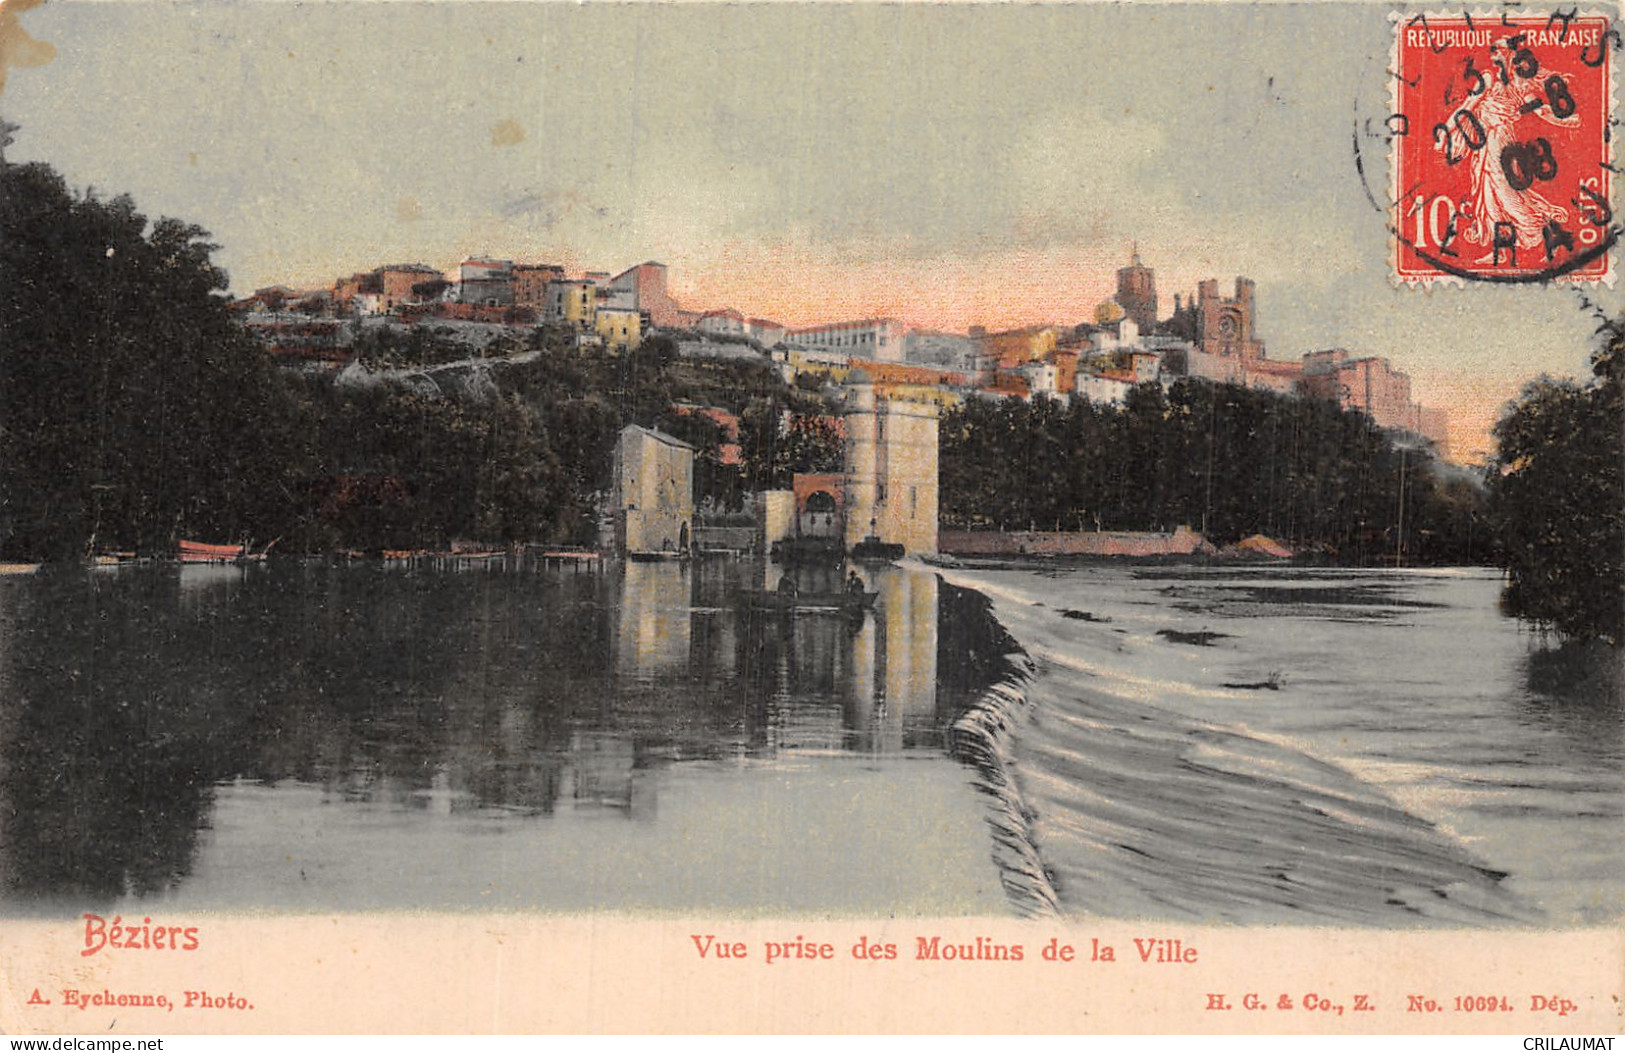 34-BEZIERS-N°5153-E/0109 - Beziers